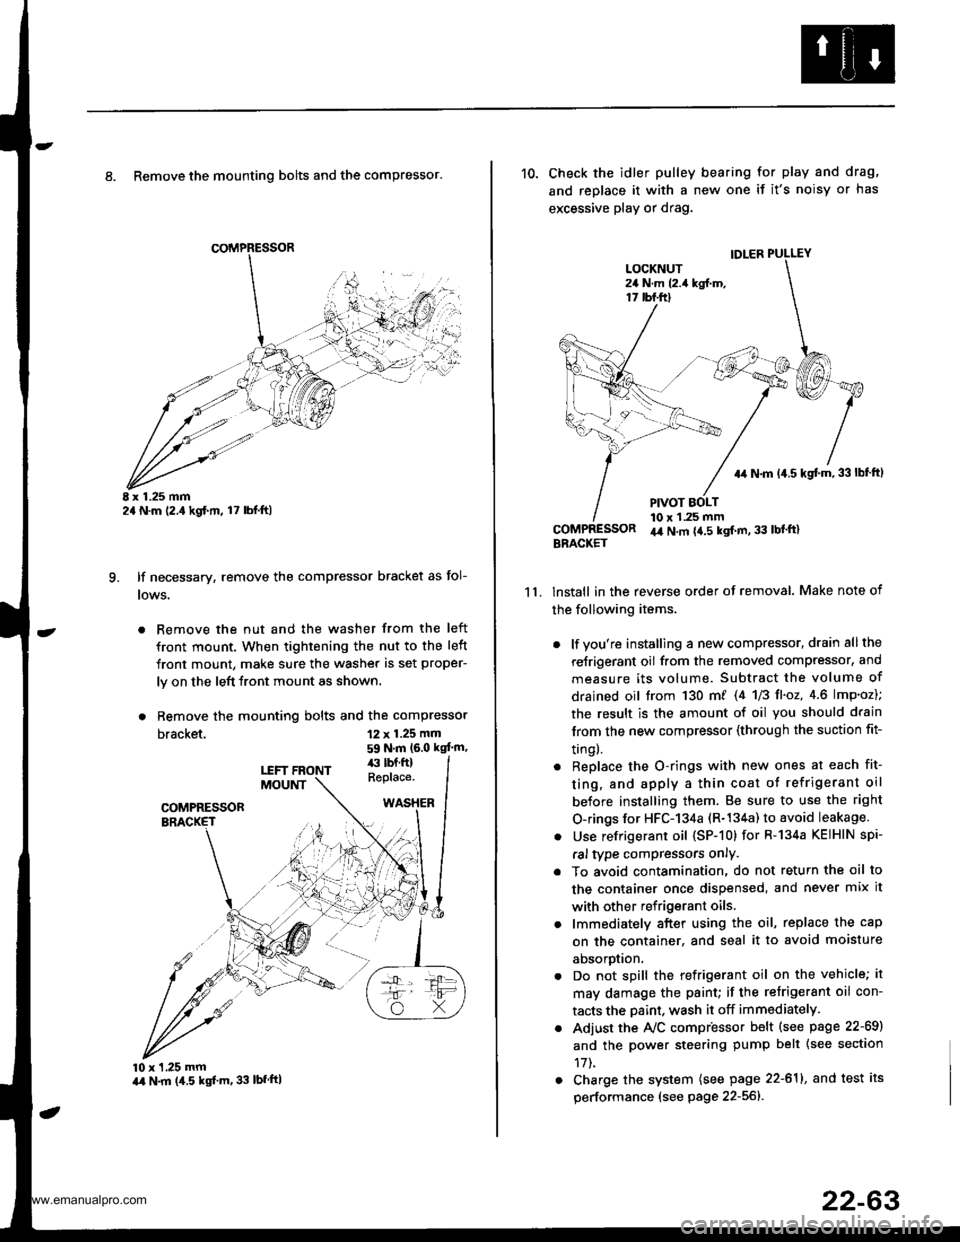 HONDA CR-V 1999 RD1-RD3 / 1.G Workshop Manual 
8. Remove the mounting bolts and the compressor.
E x 1.25 mm2a N.m (2.,1kgf.m, l7 lbl.ft)
lf necessary, remove the compressor bracket as fol-
lows.
. Remove the nut and the washer from the left
front